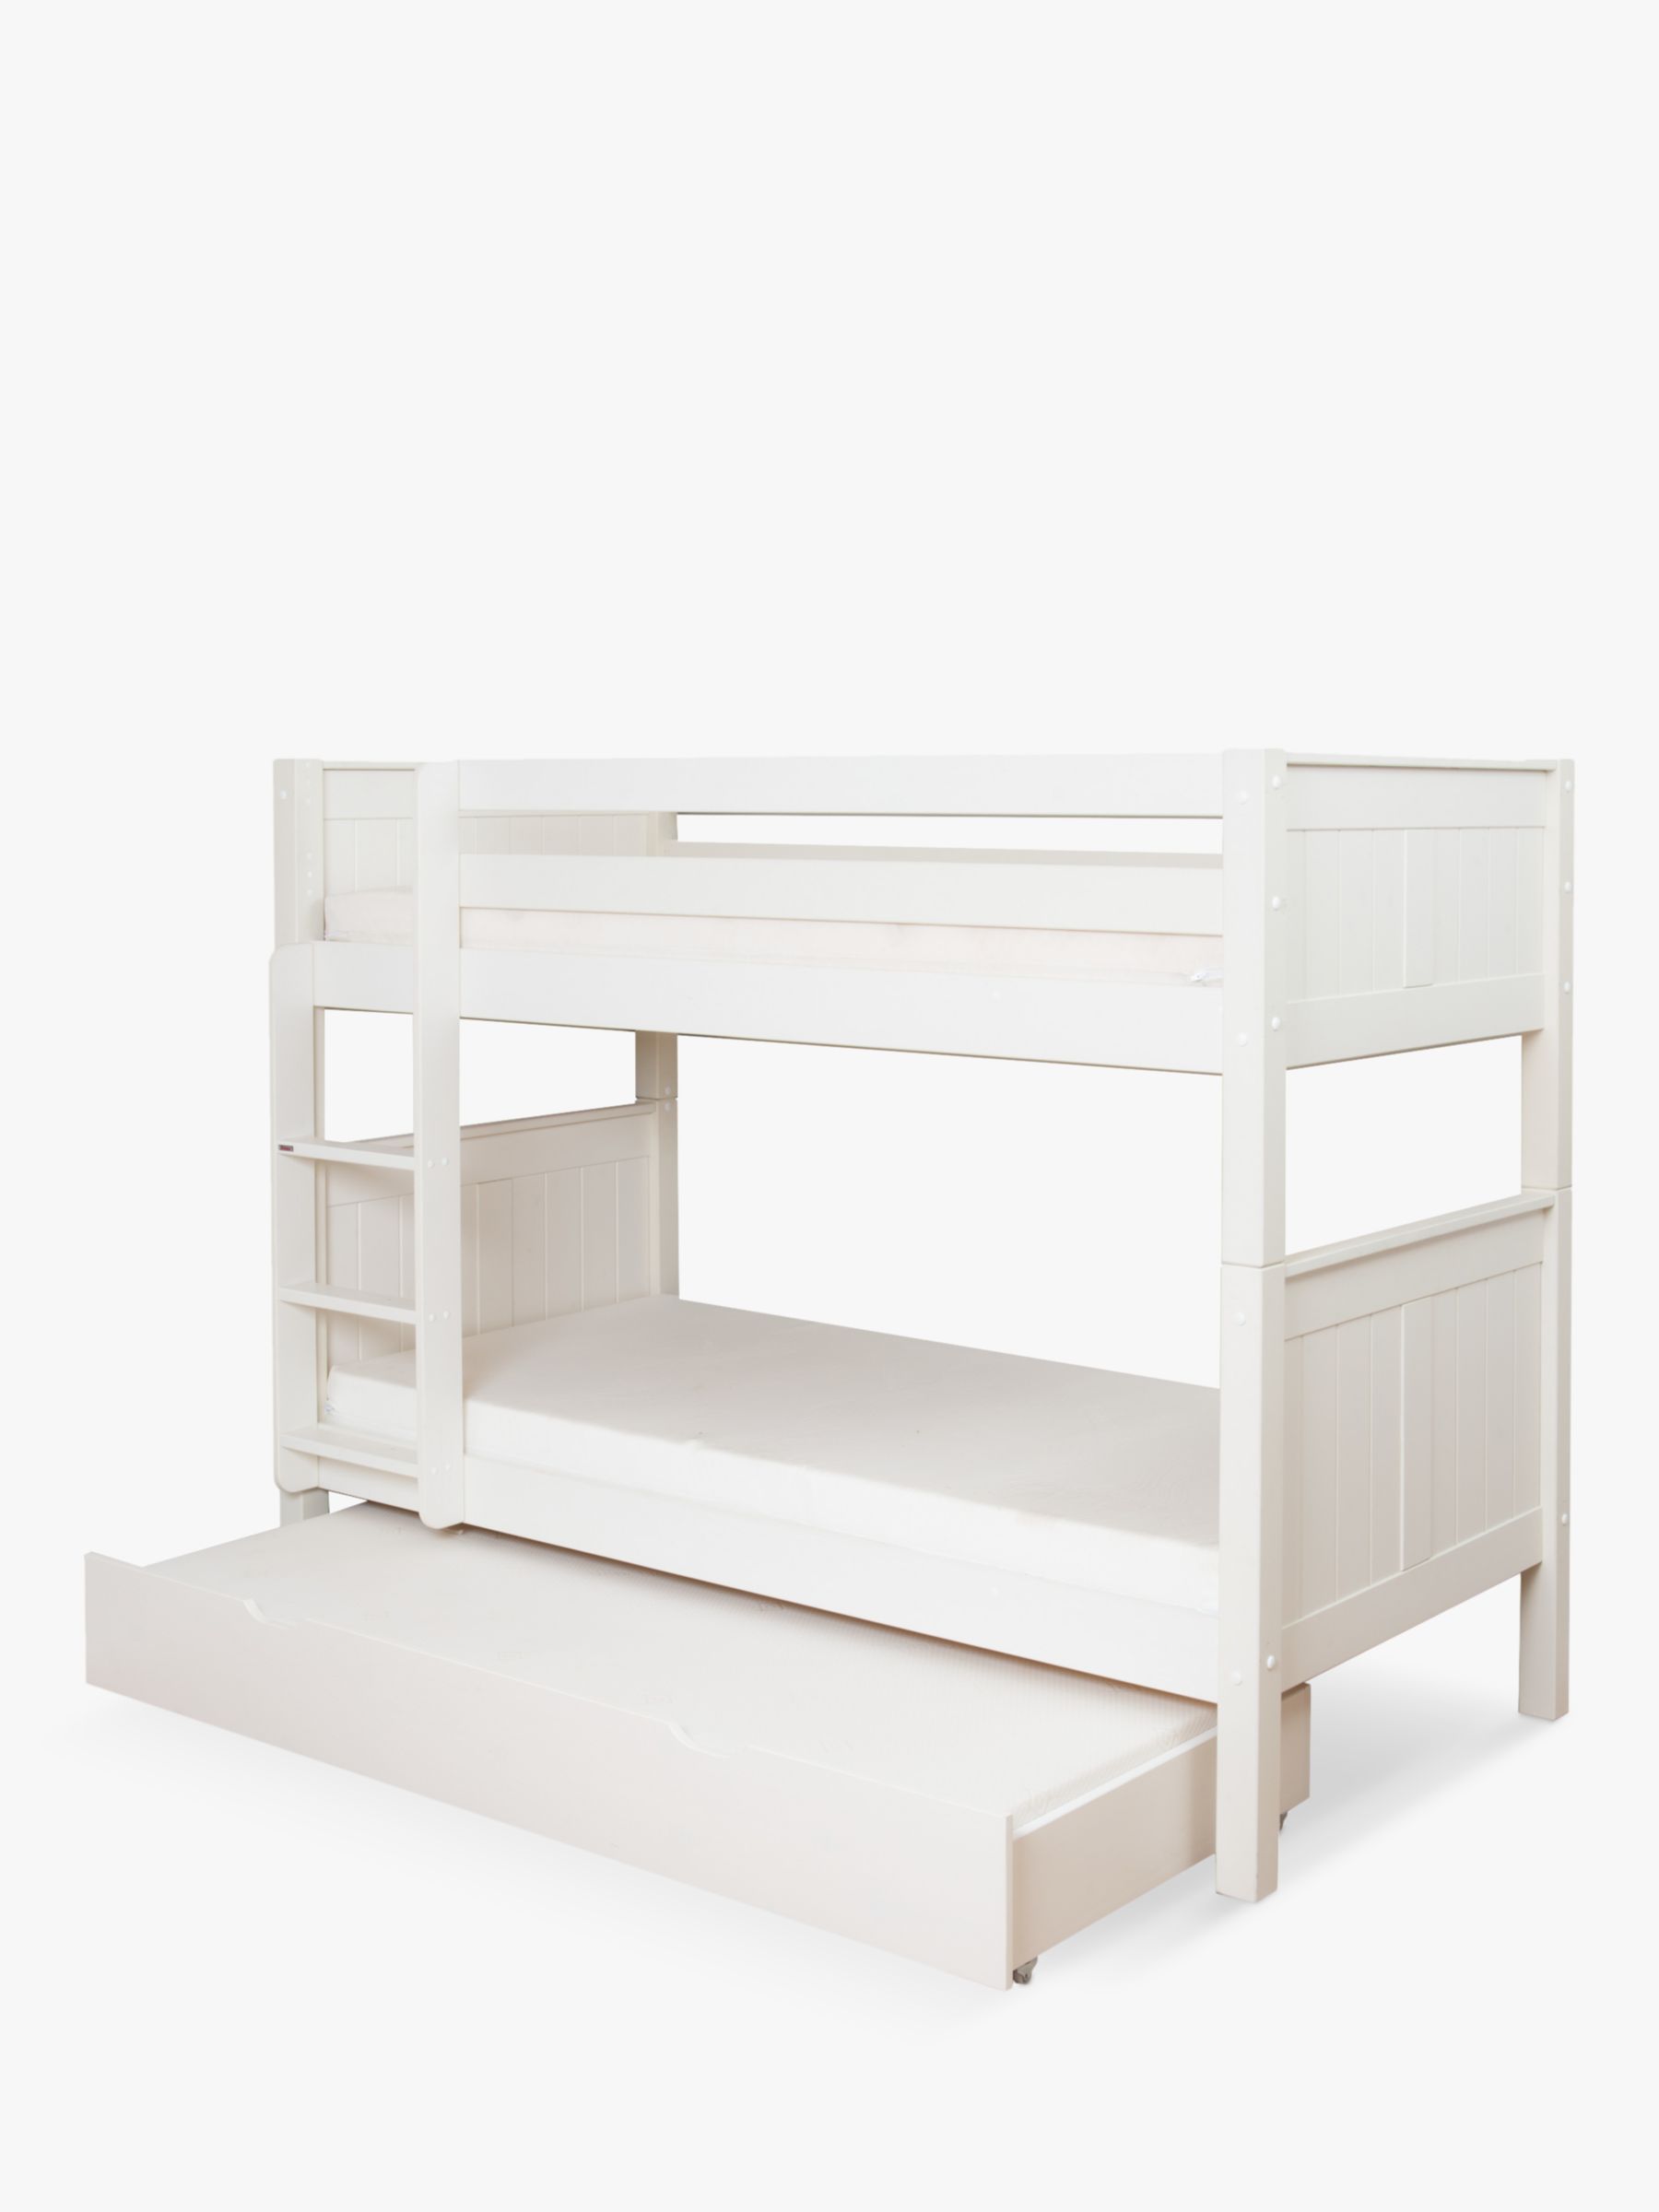 Stompa Classic Child Compliant Bunk Bed, Bunk Bed Deals